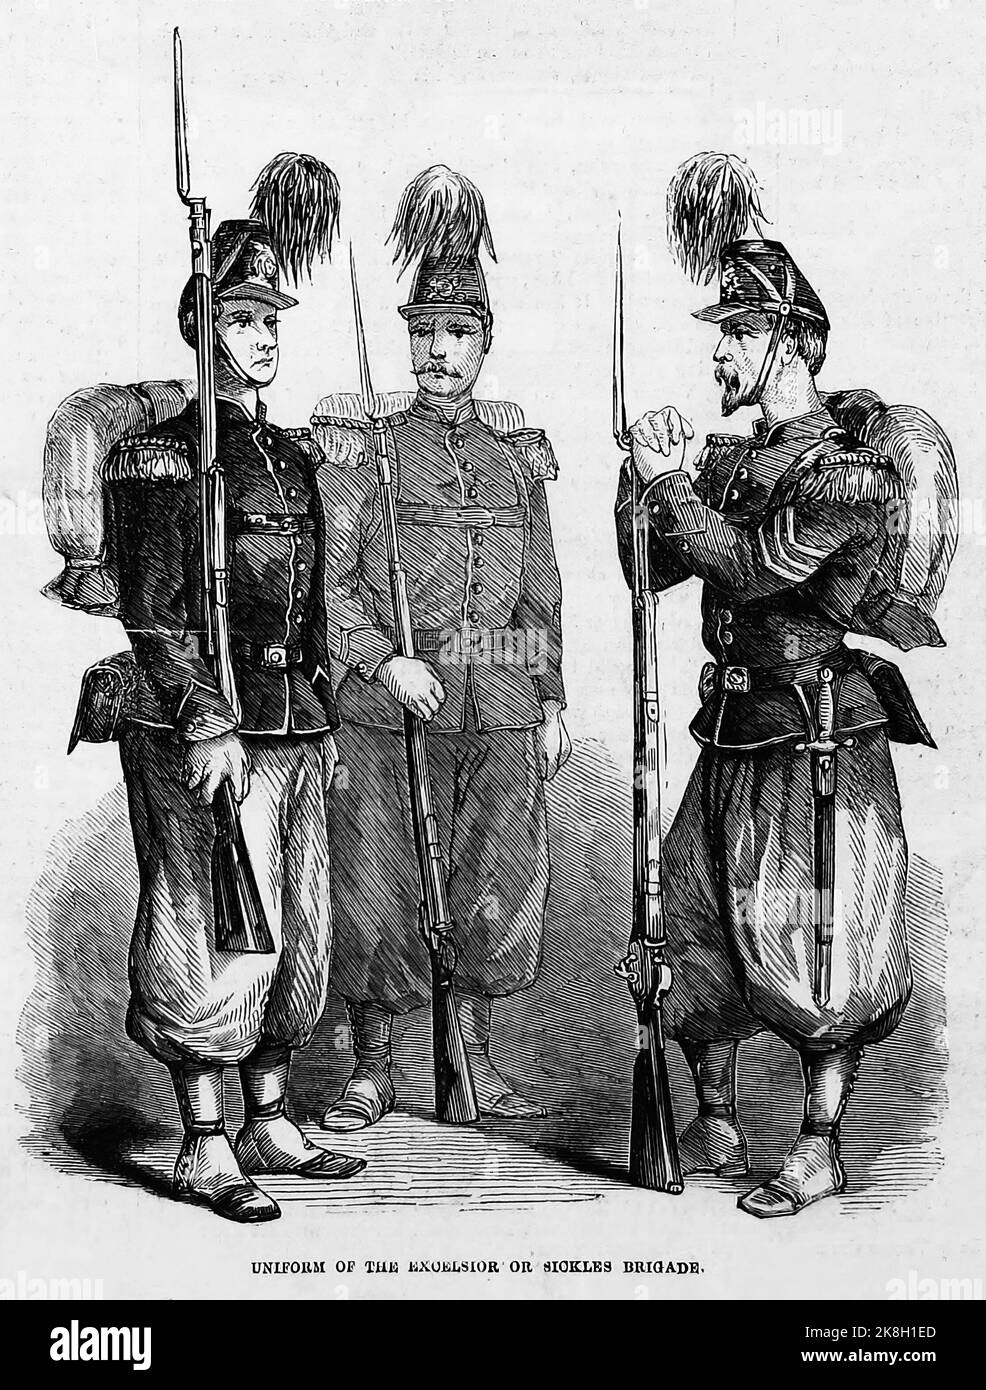 Uniform of the Excelsior or Sickles Brigade. September 1862. 19th century American Civil War illustration from Frank Leslie's Illustrated Newspaper Stock Photo